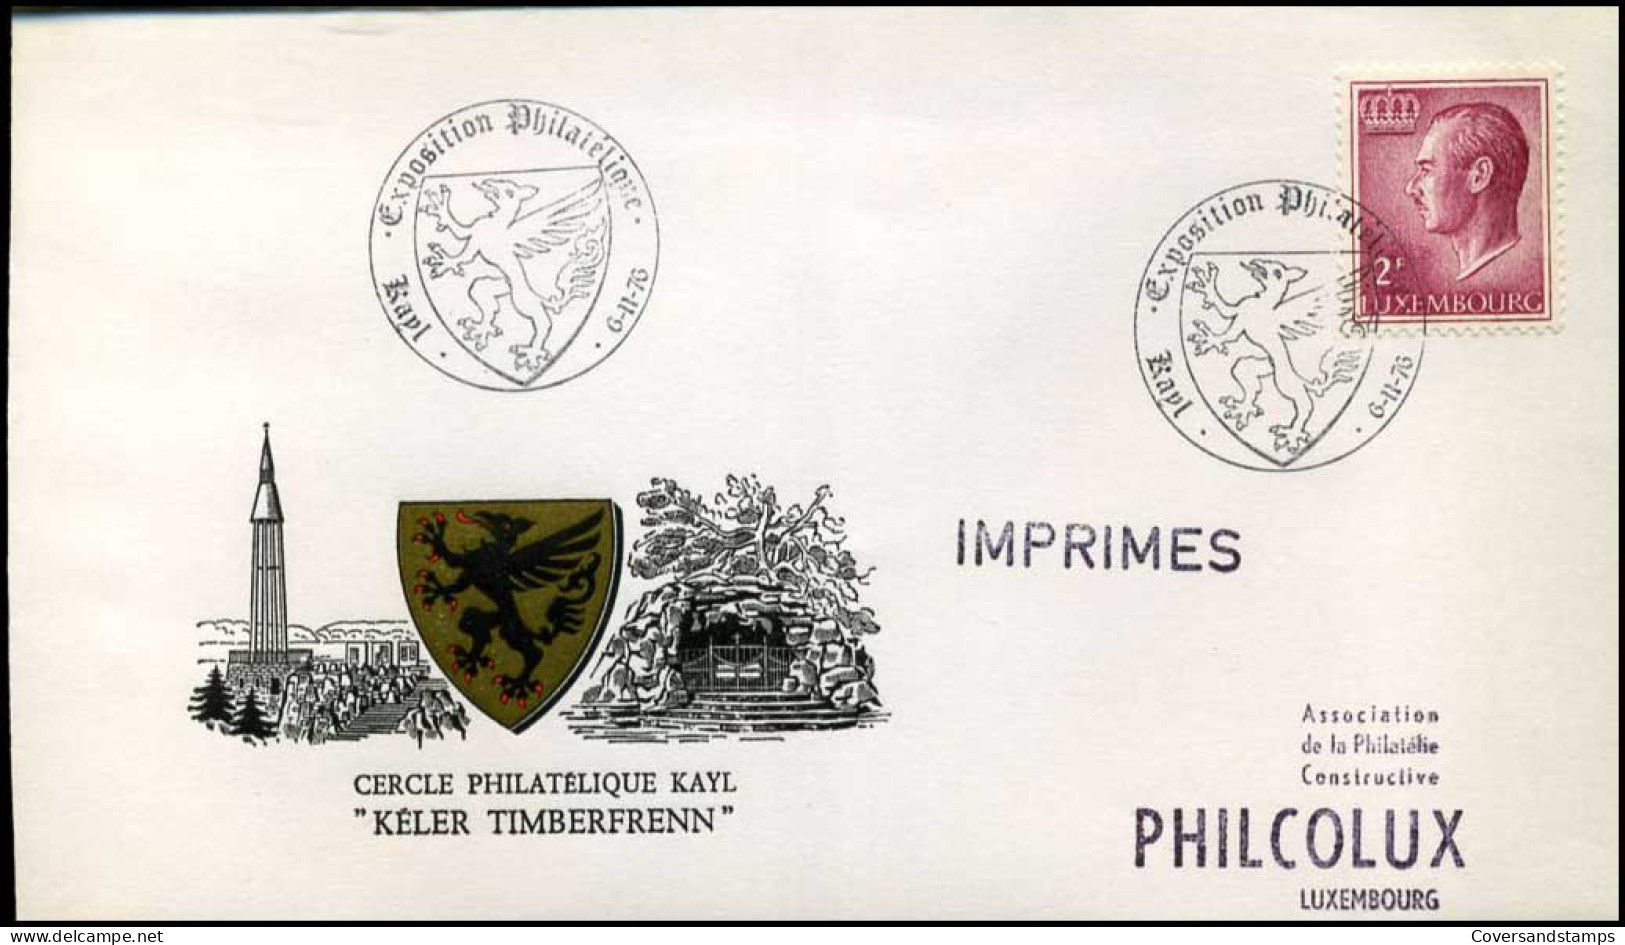 Luxembourg - FDC - Grand Duc - FDC